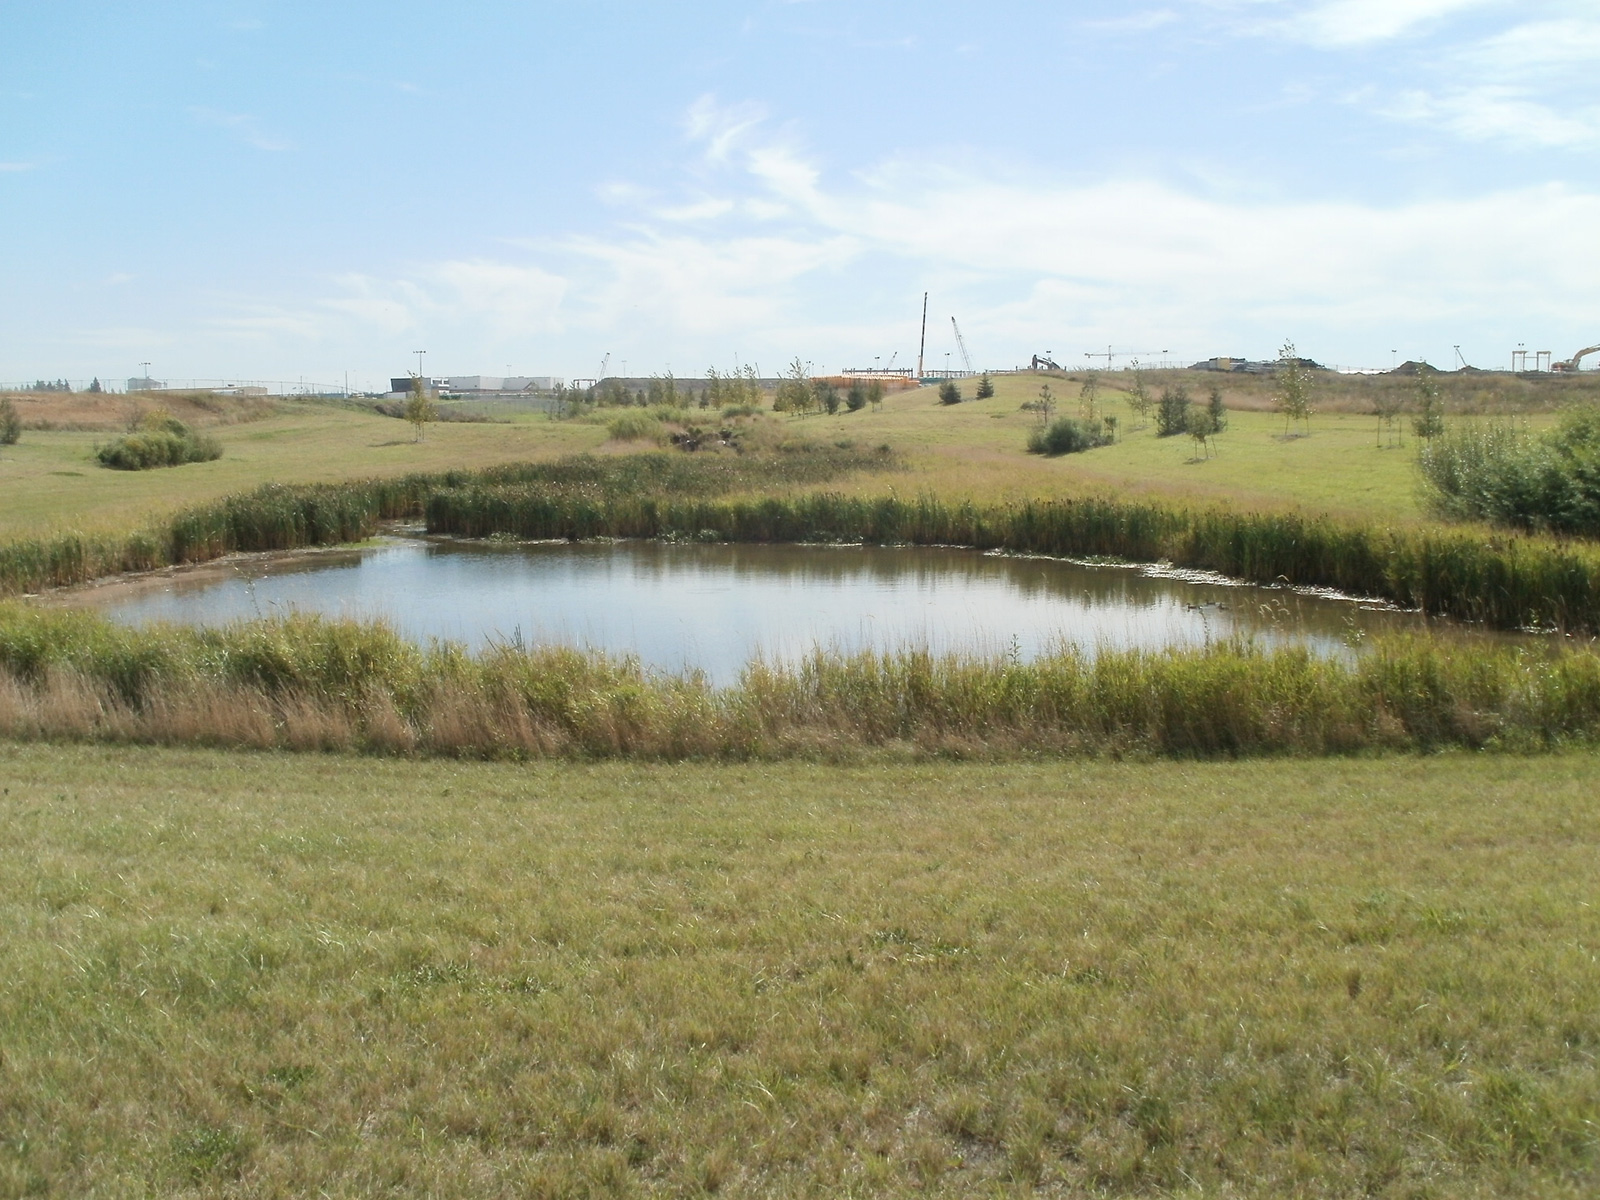 A Stormwater Facility at normal water level